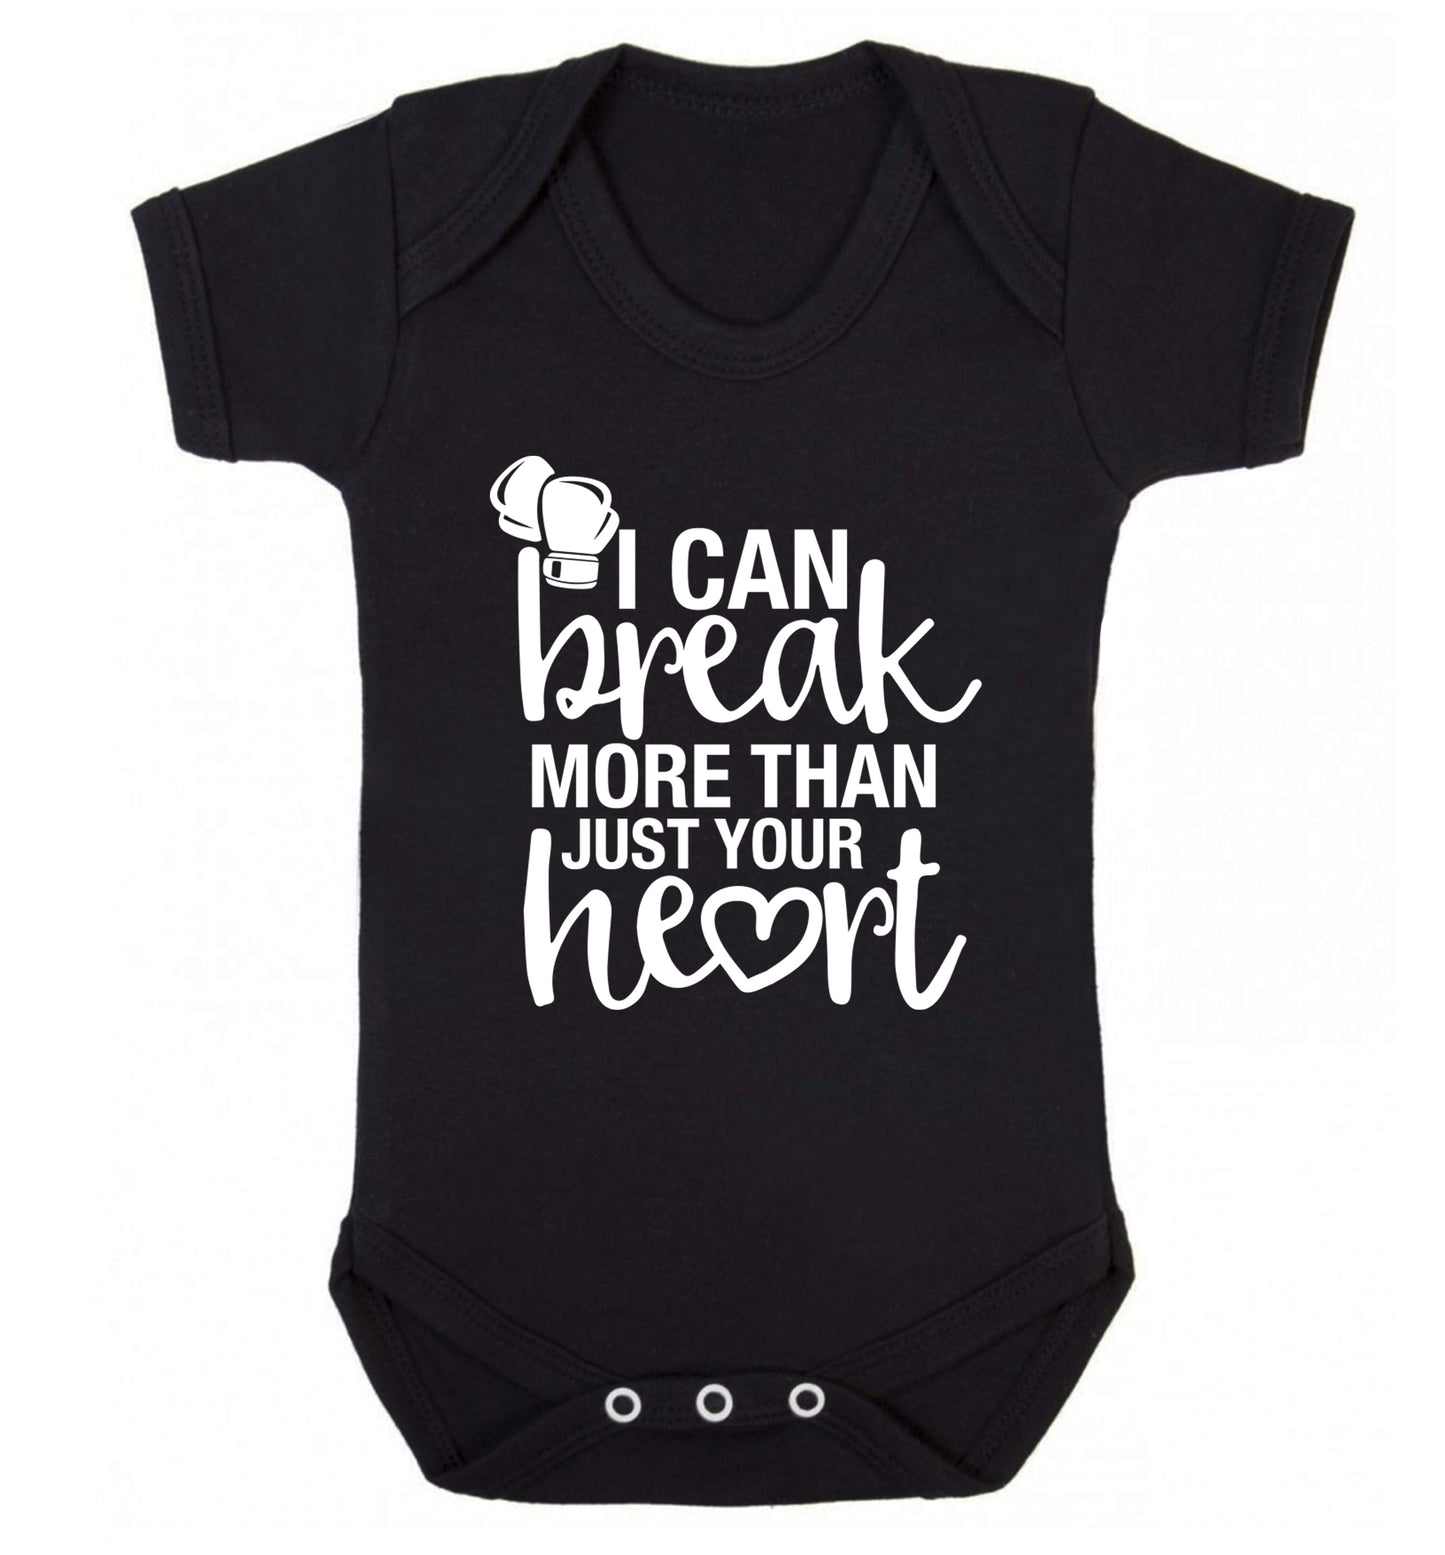 I can break more than just your heart Baby Vest black 18-24 months